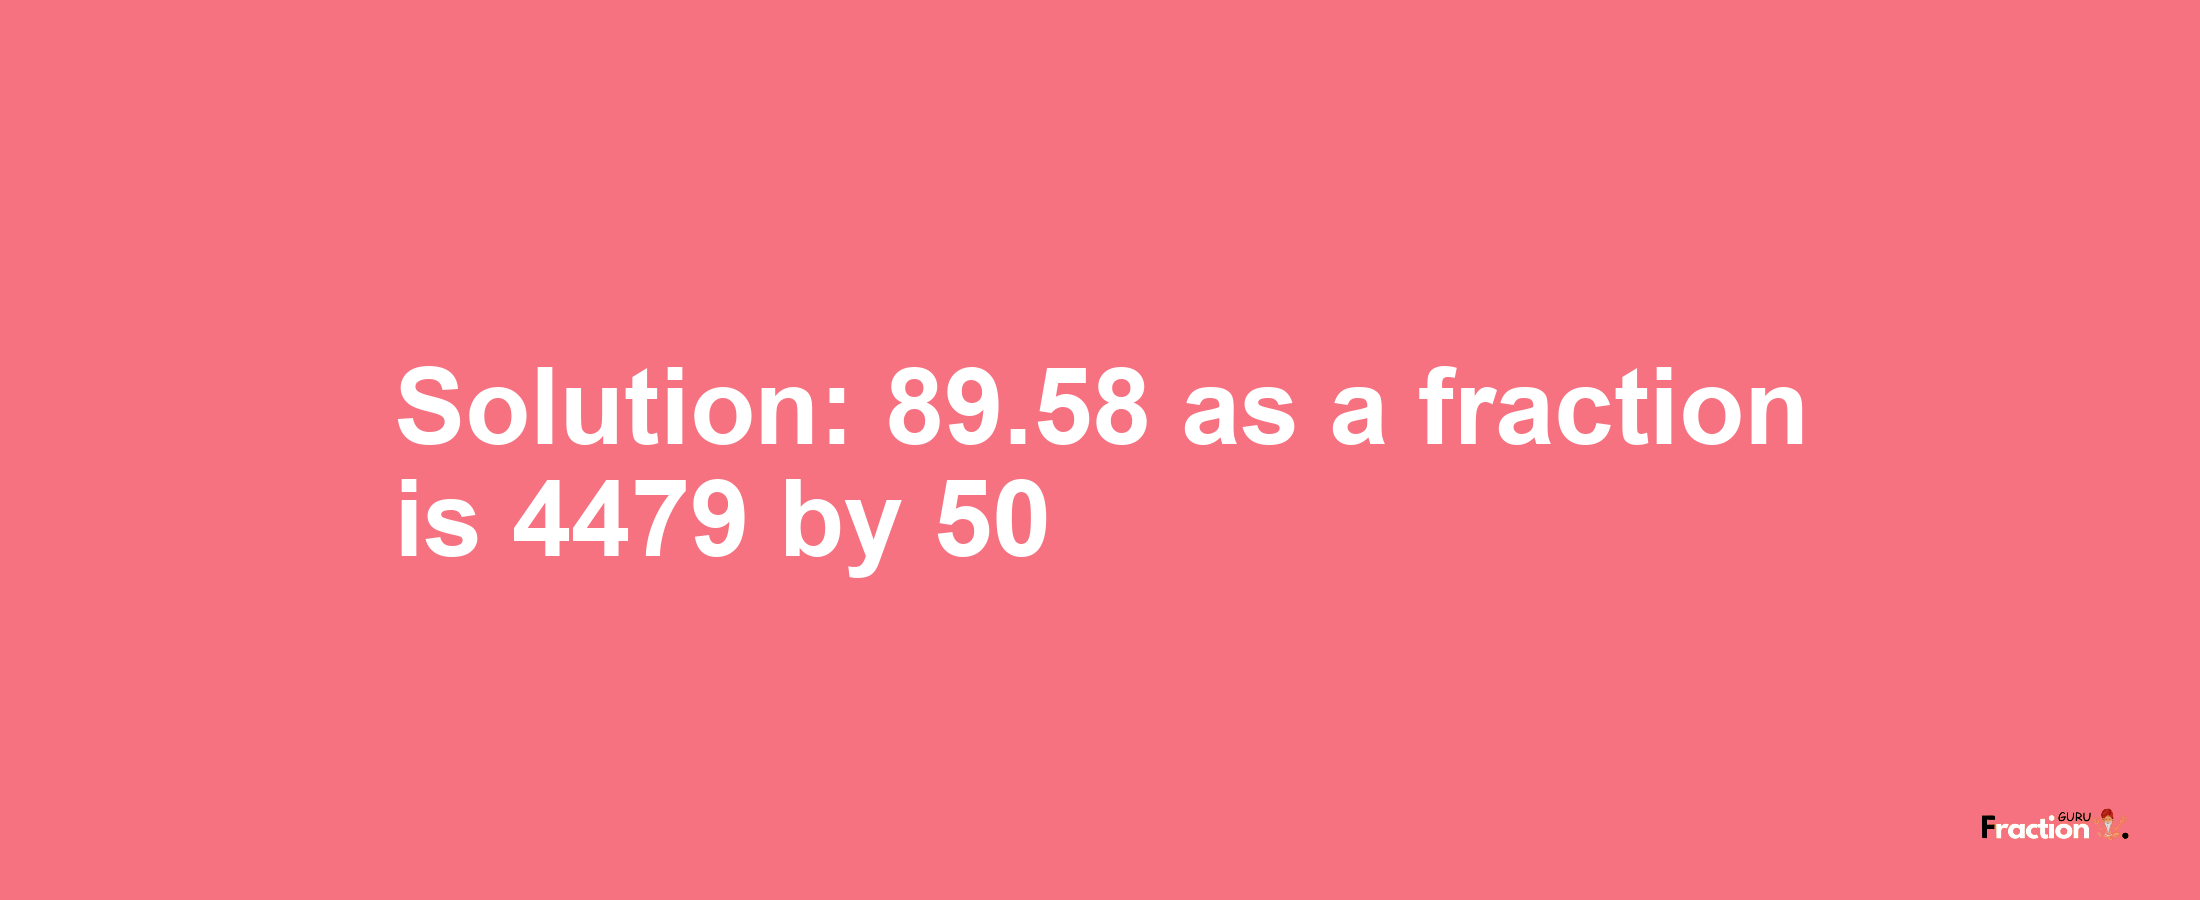 Solution:89.58 as a fraction is 4479/50